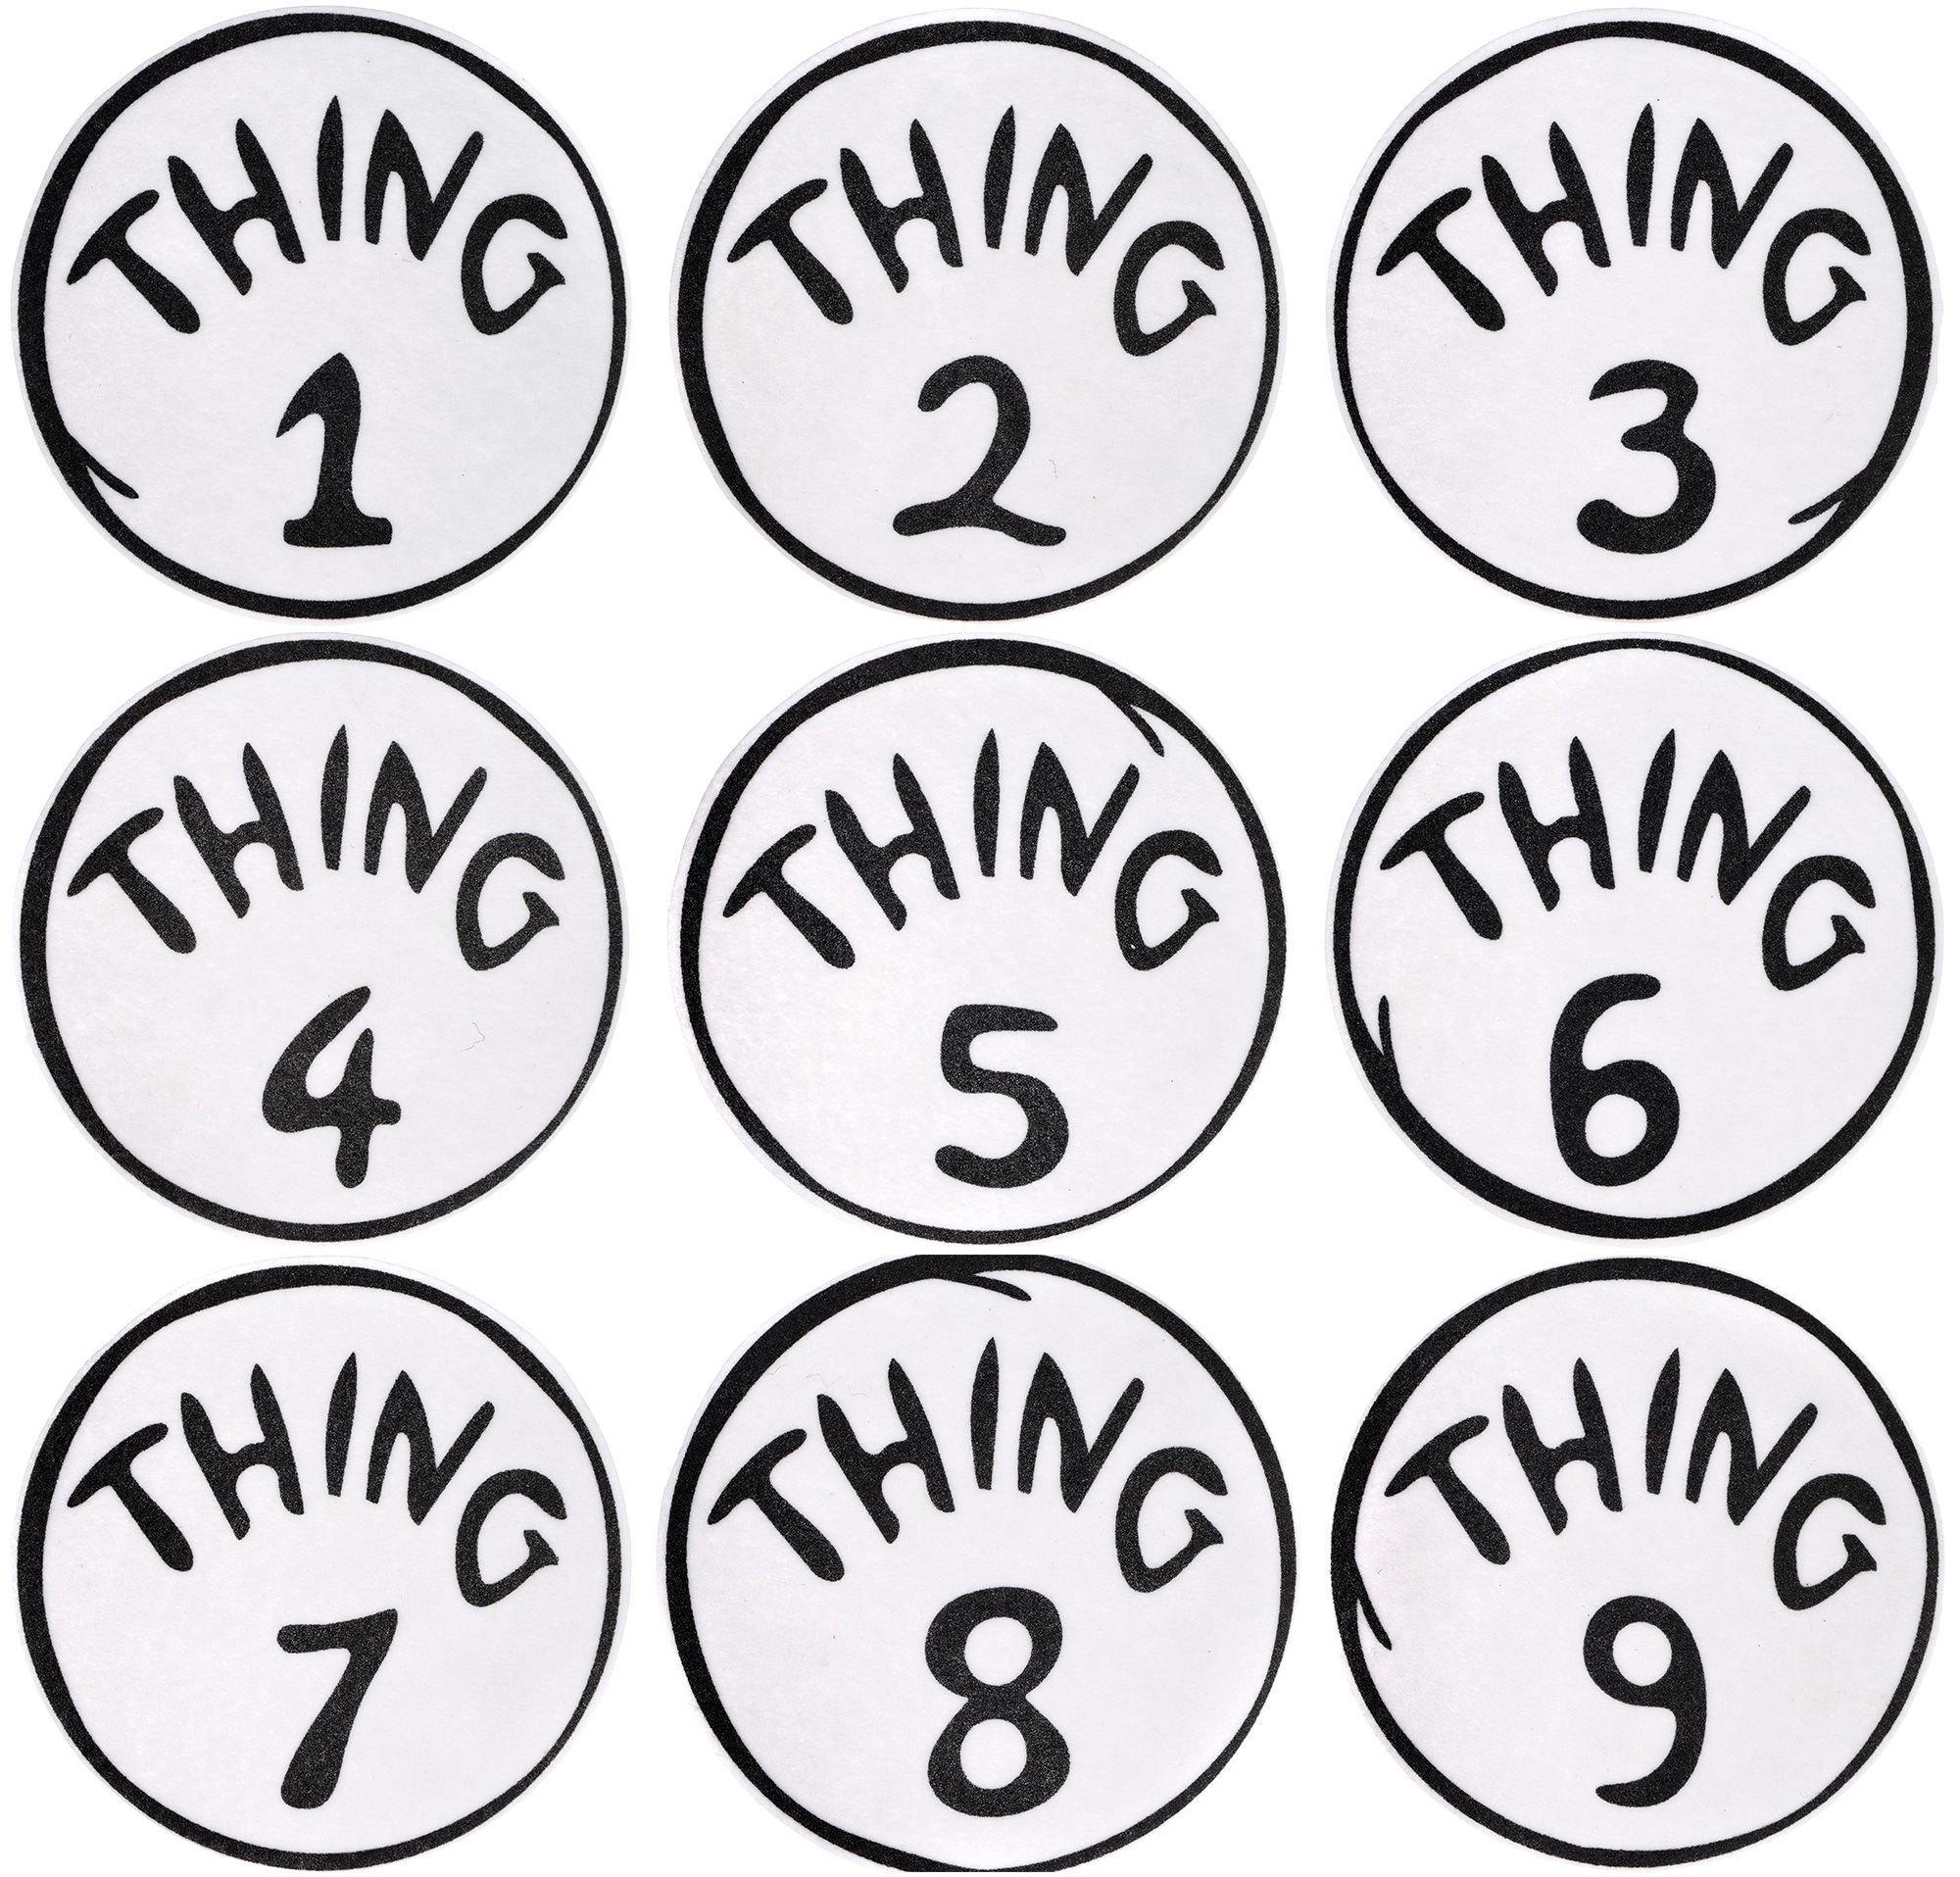 Thing 1 Through 9 Iron Patches, Size: One Size